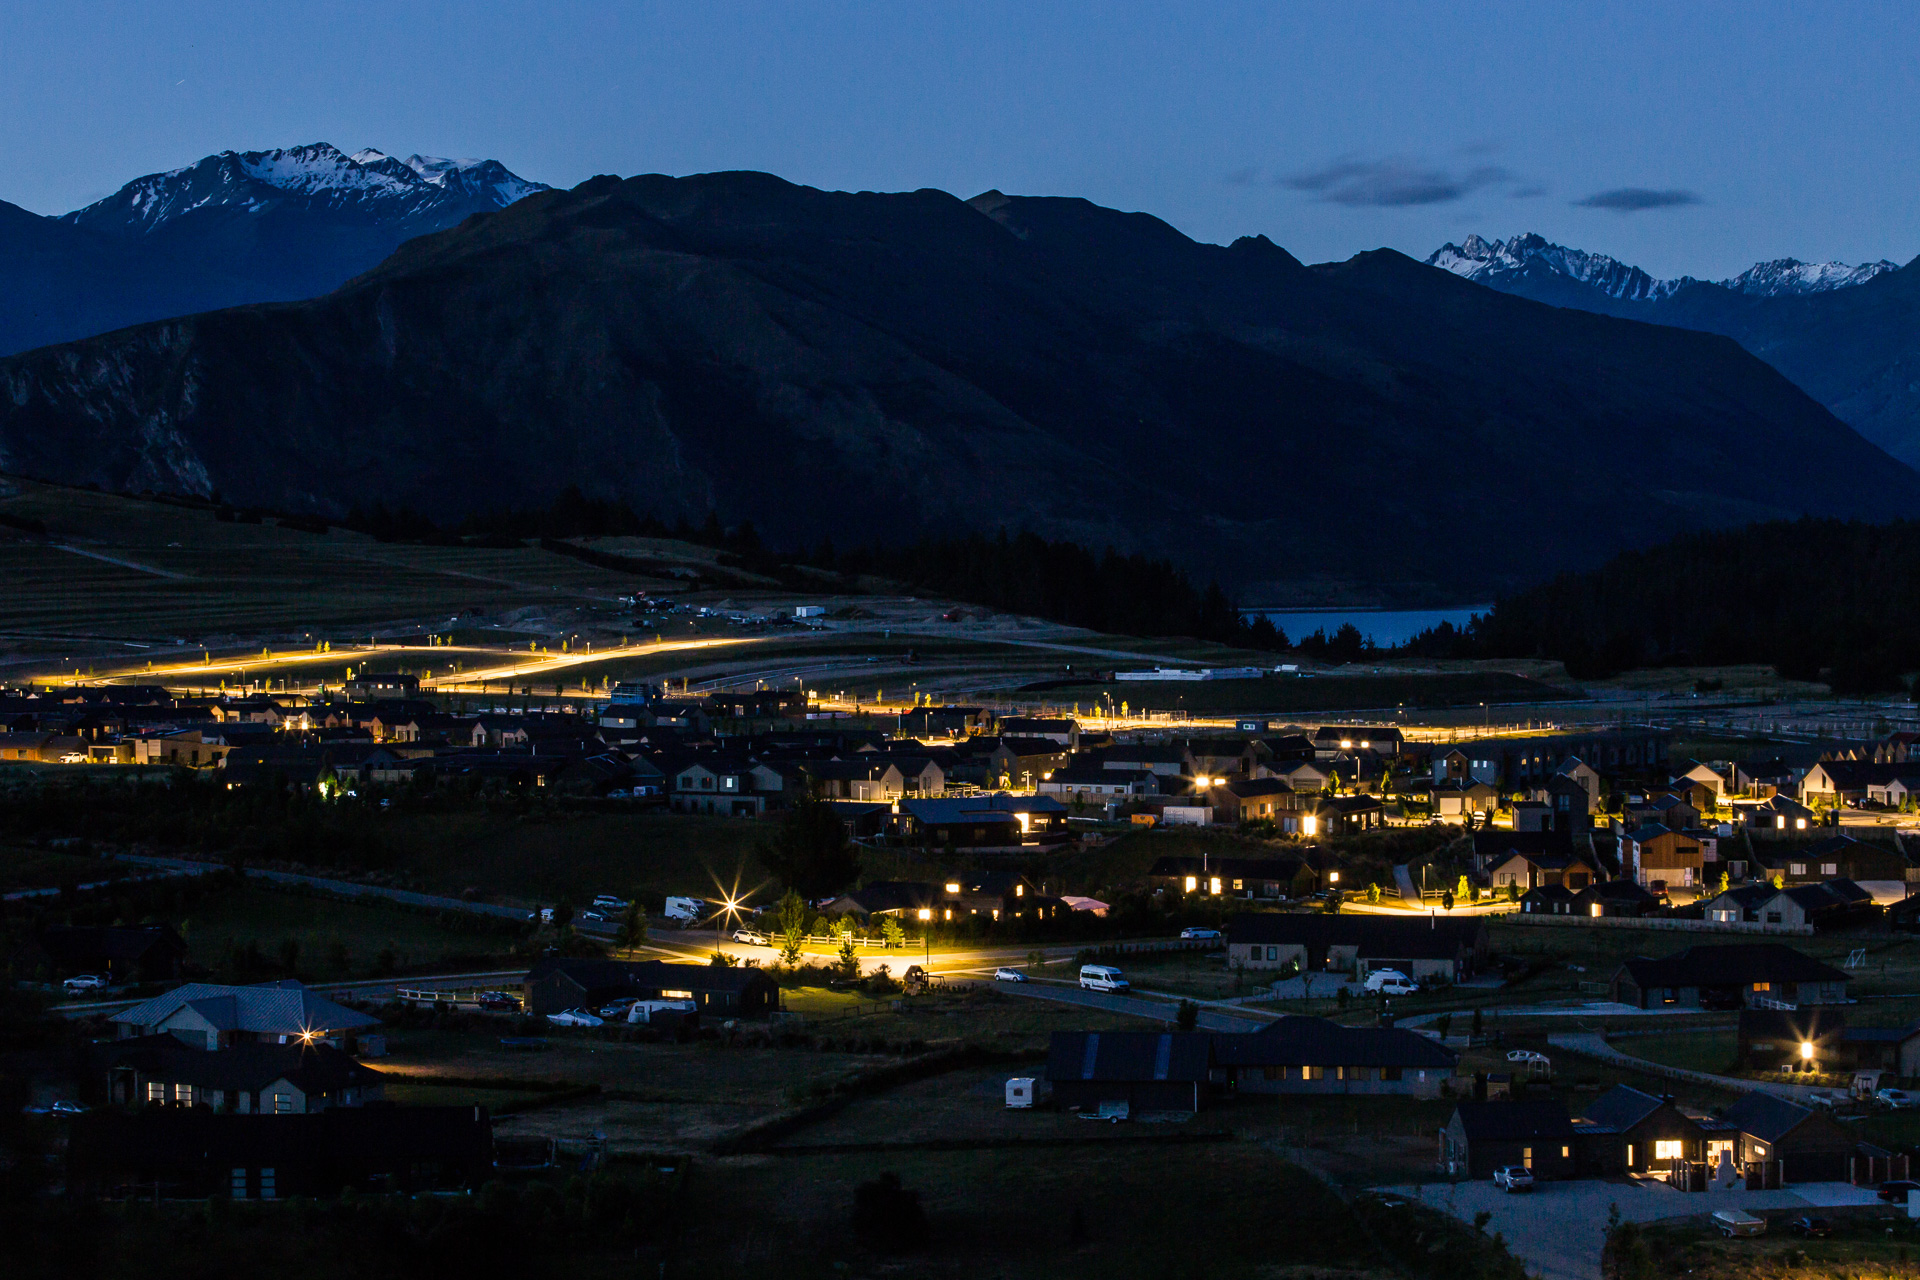 Northlake neighbourhood overview at night illuminated by ibex lighting solutions with magnificent mountains in the background.